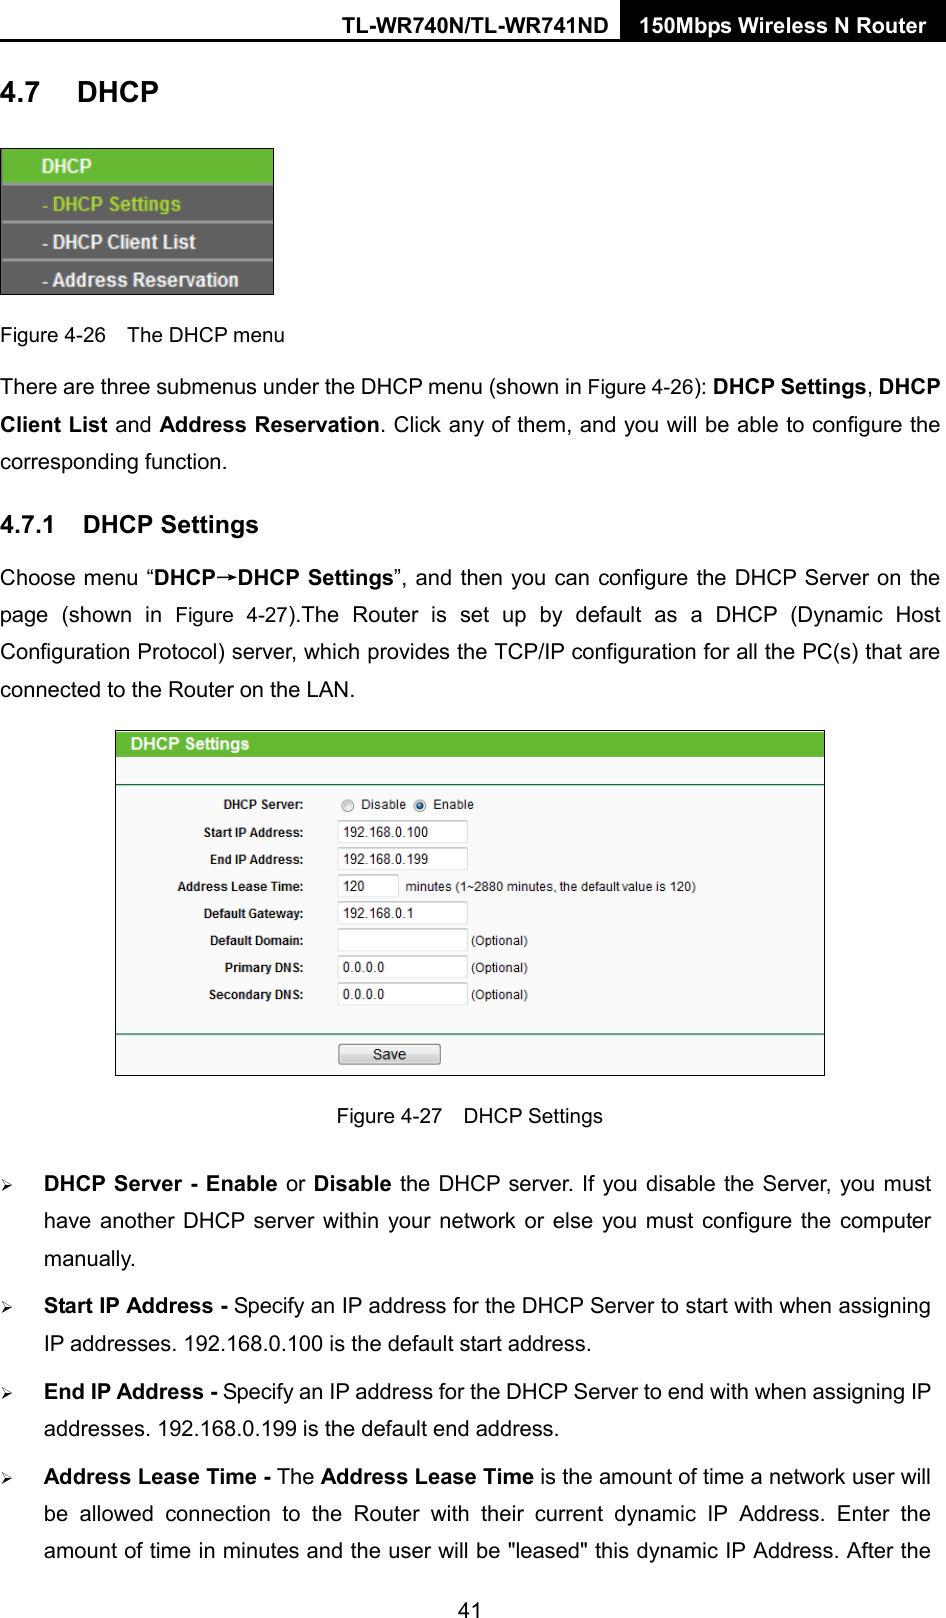 TL-WR740N/TL-WR741ND 150Mbps Wireless N Router  4.7 DHCP  Figure 4-26  The DHCP menu There are three submenus under the DHCP menu (shown in Figure 4-26): DHCP Settings, DHCP Client List and Address Reservation. Click any of them, and you will be able to configure the corresponding function. 4.7.1 DHCP Settings Choose menu “DHCP→DHCP Settings”, and then you can configure the DHCP Server on the page (shown in Figure  4-27).The  Router is set up by default as a DHCP (Dynamic Host Configuration Protocol) server, which provides the TCP/IP configuration for all the PC(s) that are connected to the Router on the LAN.    Figure 4-27    DHCP Settings  DHCP Server - Enable or Disable the DHCP server. If you disable the Server, you must have another DHCP server within your network or else you must configure the computer manually.  Start IP Address - Specify an IP address for the DHCP Server to start with when assigning IP addresses. 192.168.0.100 is the default start address.  End IP Address - Specify an IP address for the DHCP Server to end with when assigning IP addresses. 192.168.0.199 is the default end address.  Address Lease Time - The Address Lease Time is the amount of time a network user will be allowed connection to the Router with their current dynamic IP Address. Enter the amount of time in minutes and the user will be &quot;leased&quot; this dynamic IP Address. After the 41 